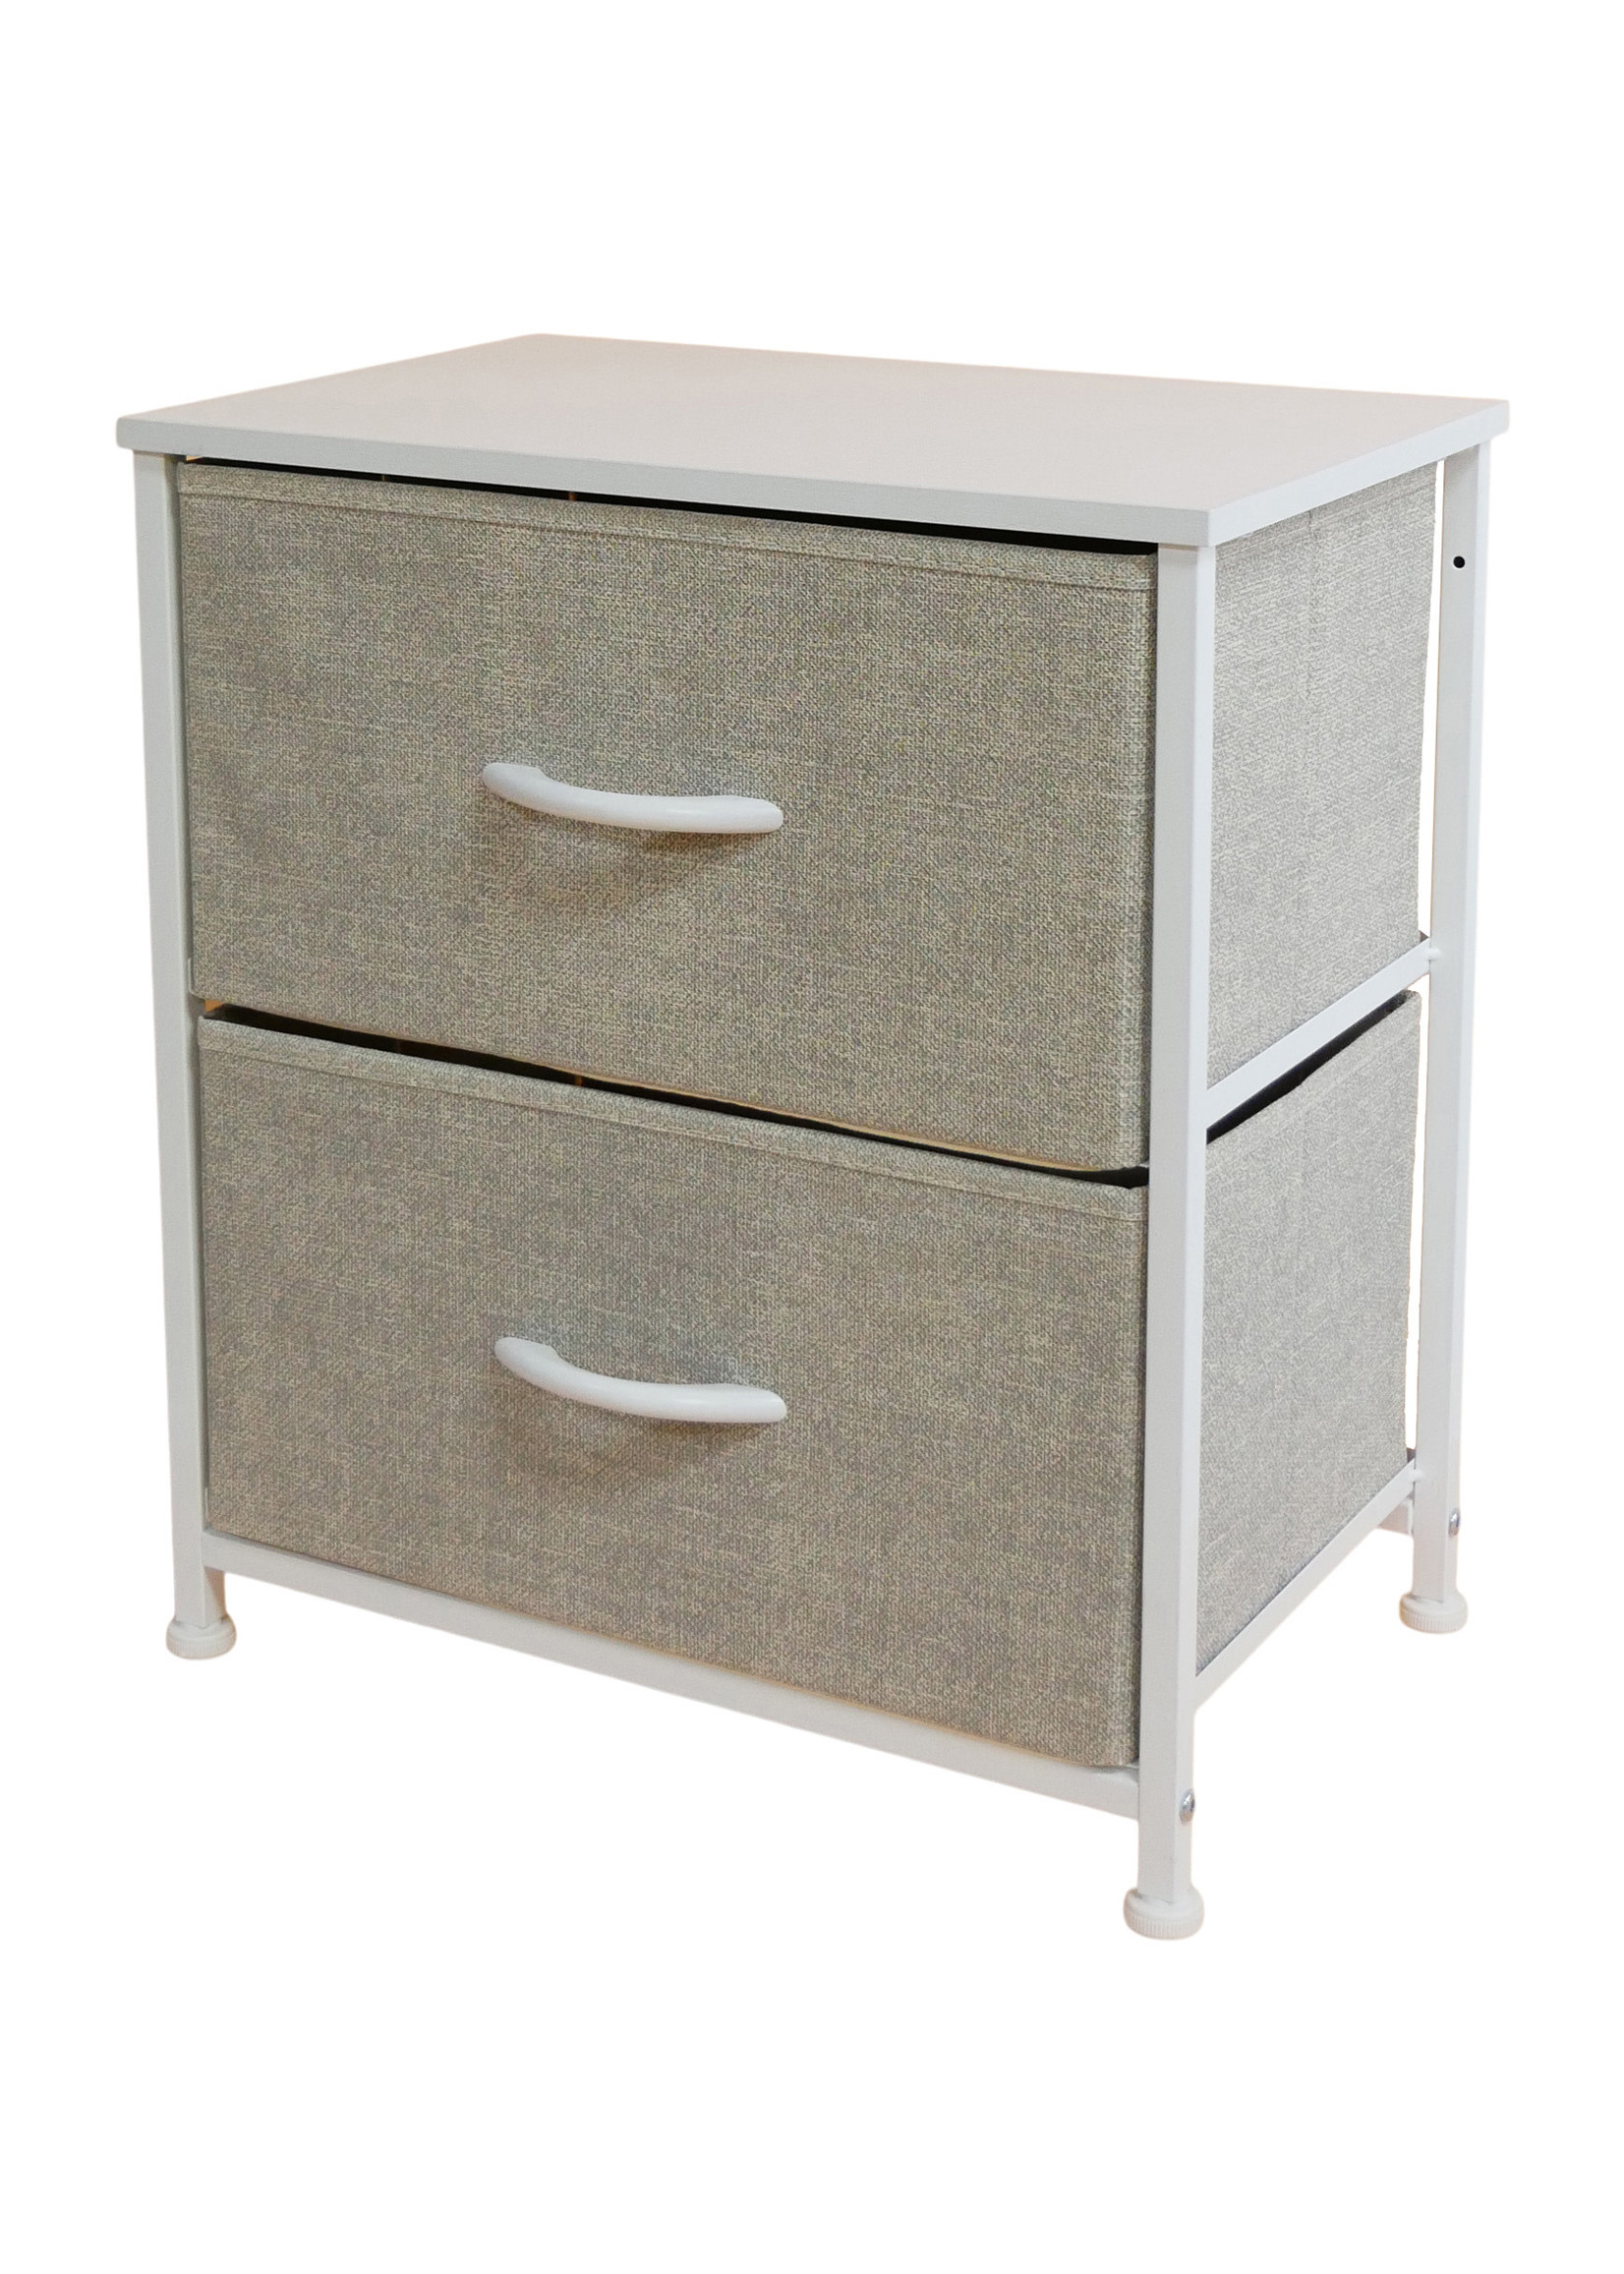 2 DRAWER SIDE TABLE, TAUPE/WHITE